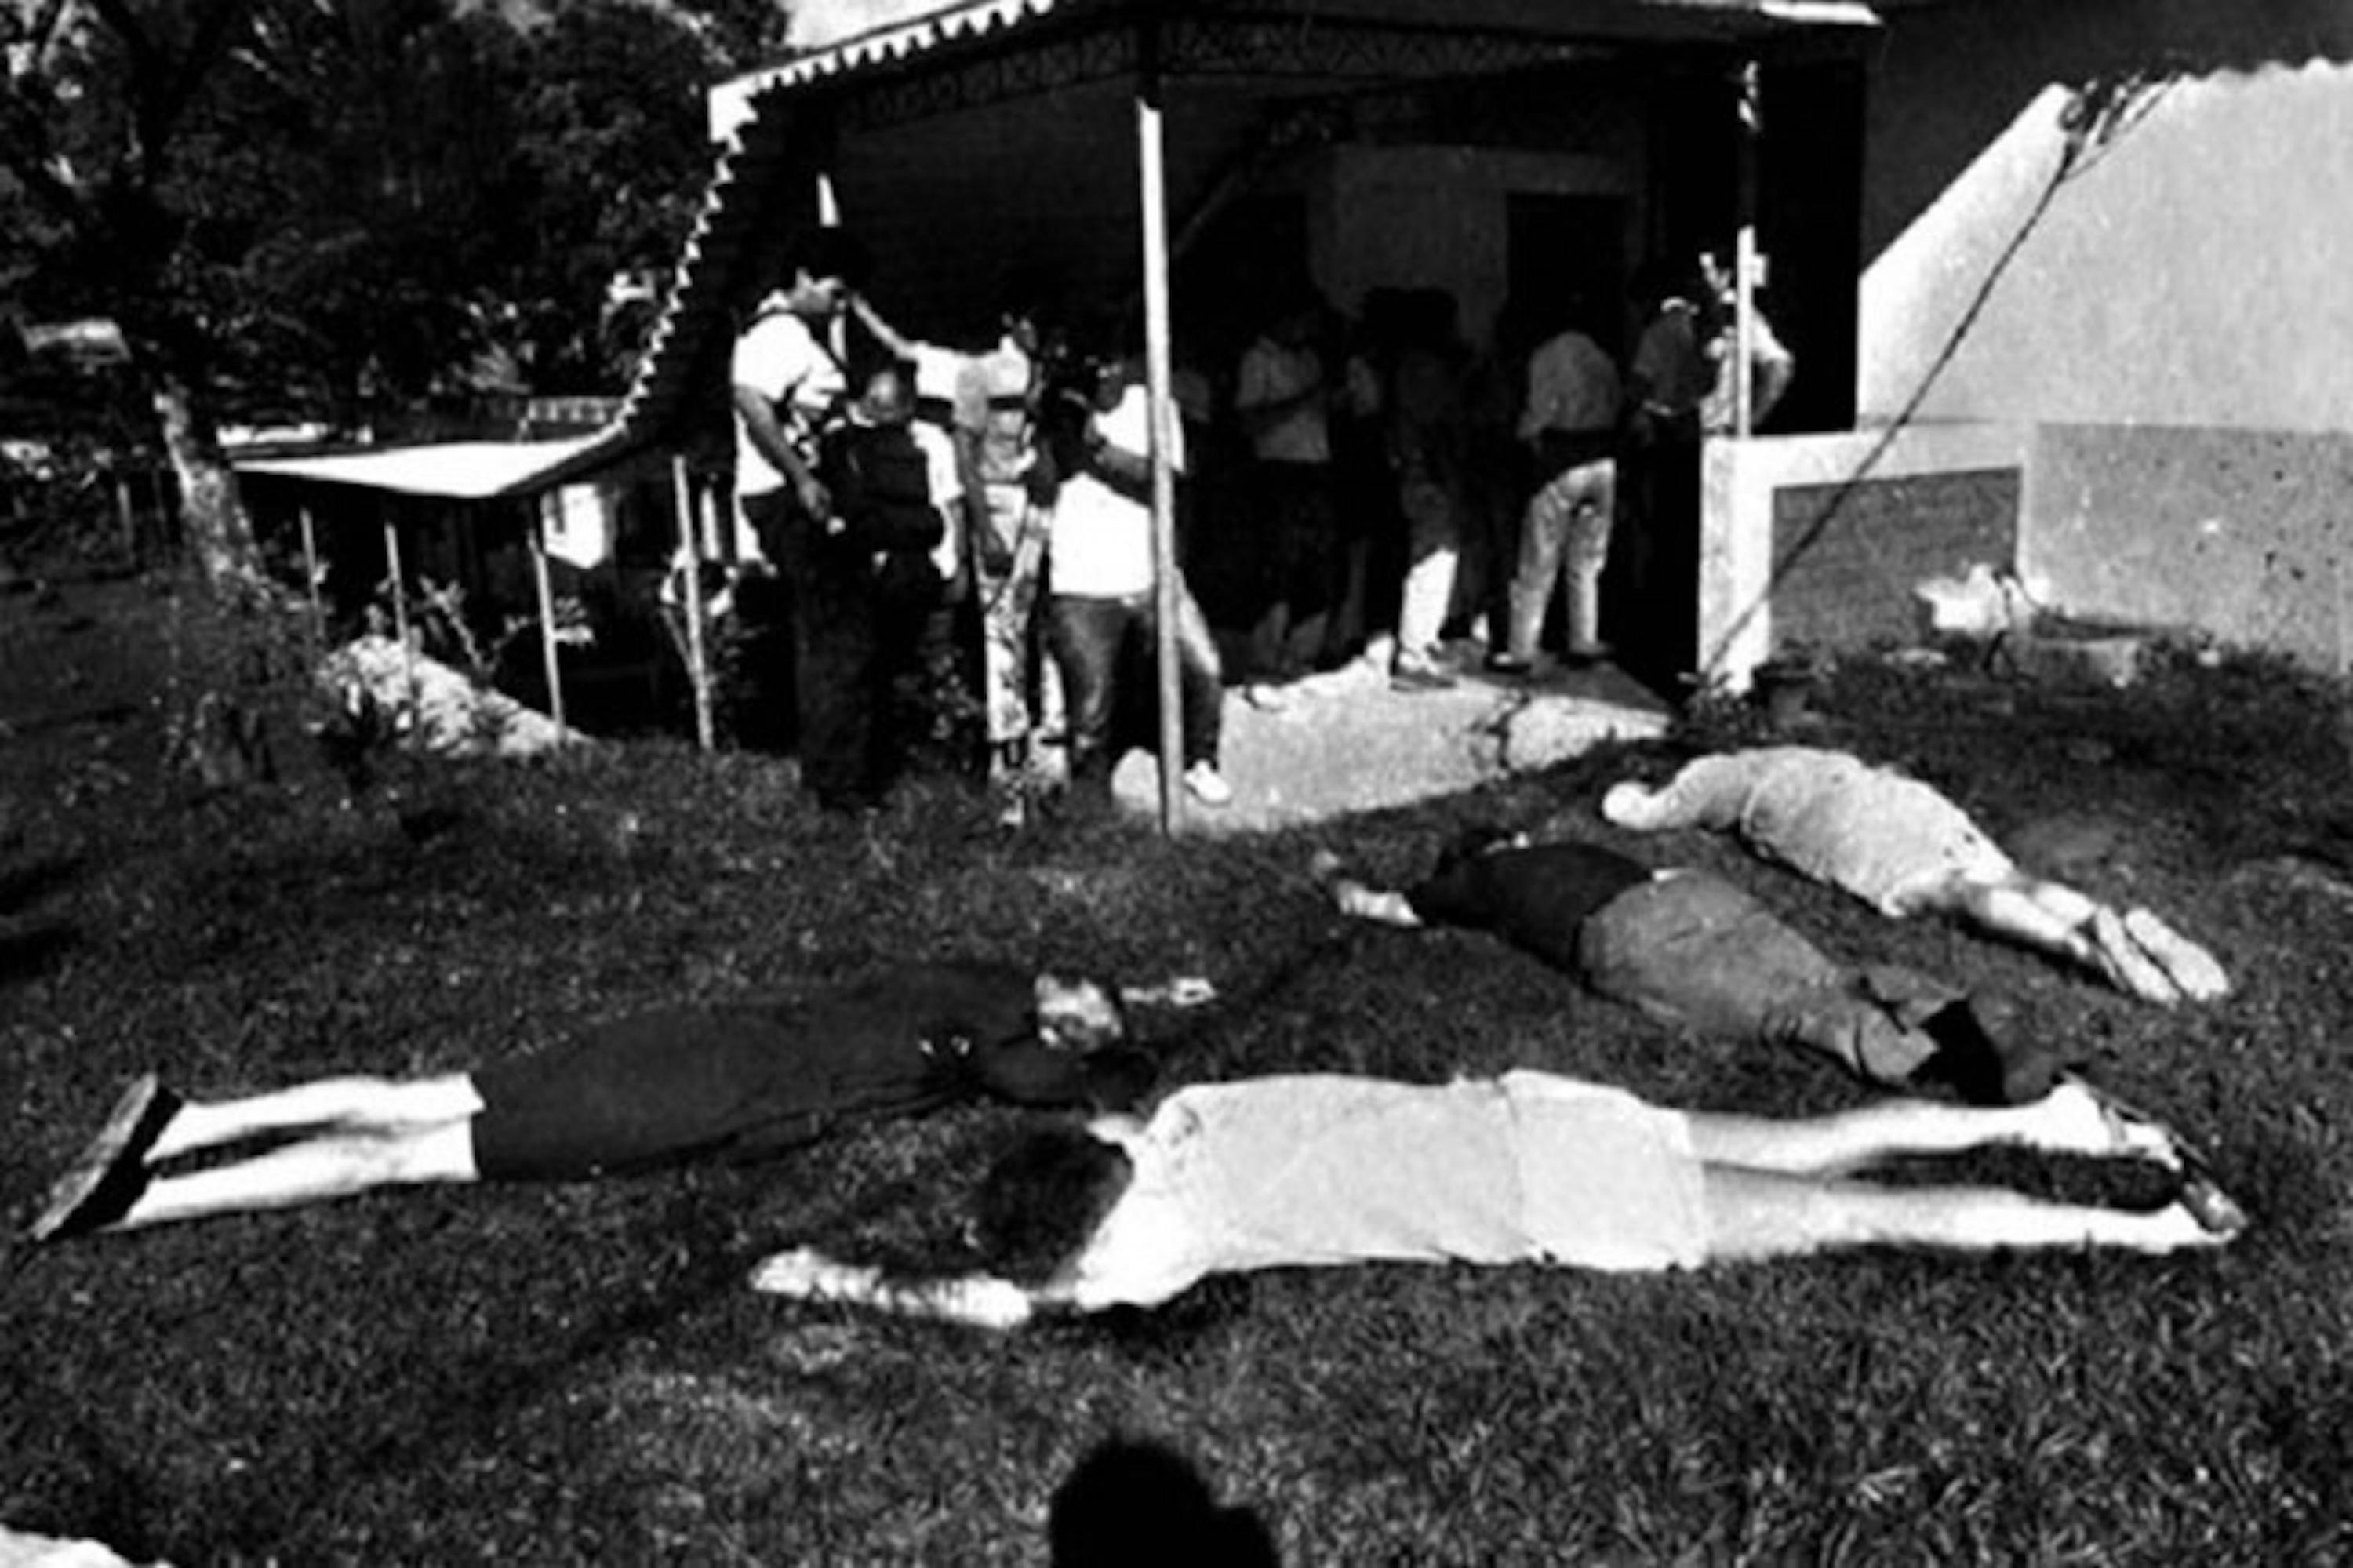 Members of the Salvadoran military executed six Jesuit priests and two women in the early hours of Nov. 16, 1989, on the campus of Central American University. Photo from El Faro archive.